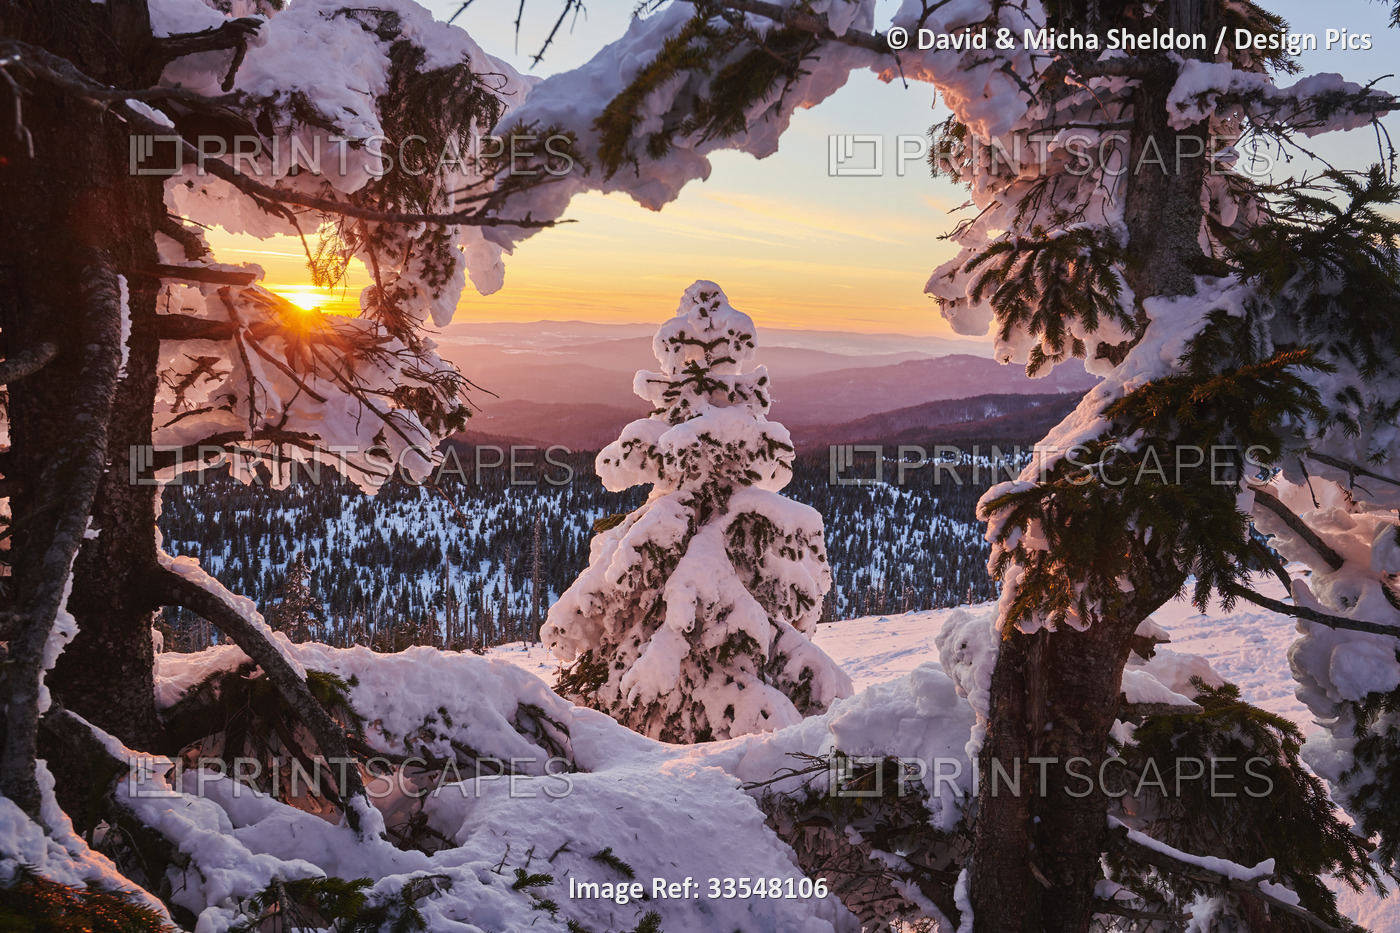 Frozen Norway spruce or European spruce (Picea abies) trees at sunset on Mount ...